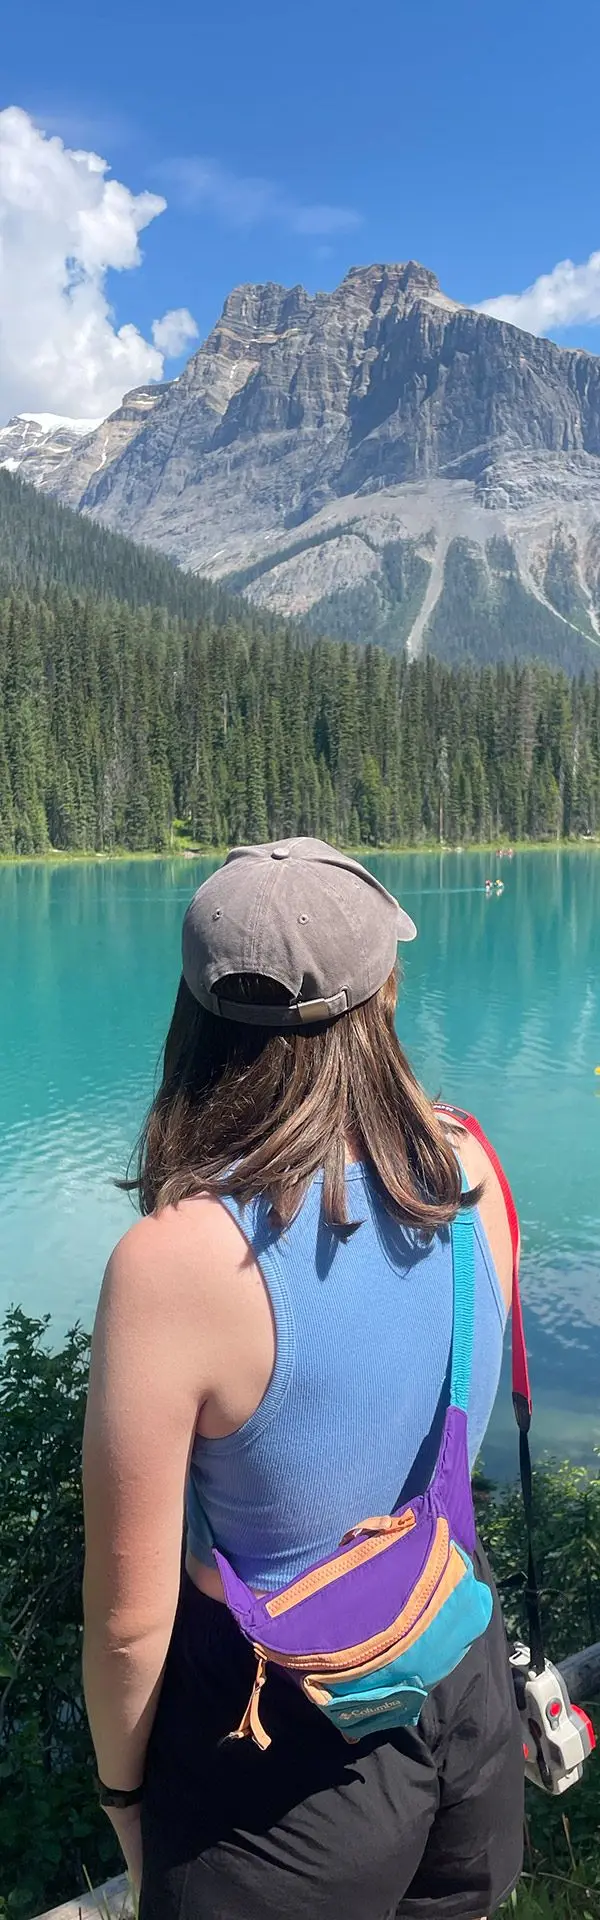 A girl faces a blue lake in Canada with a mountain in the background